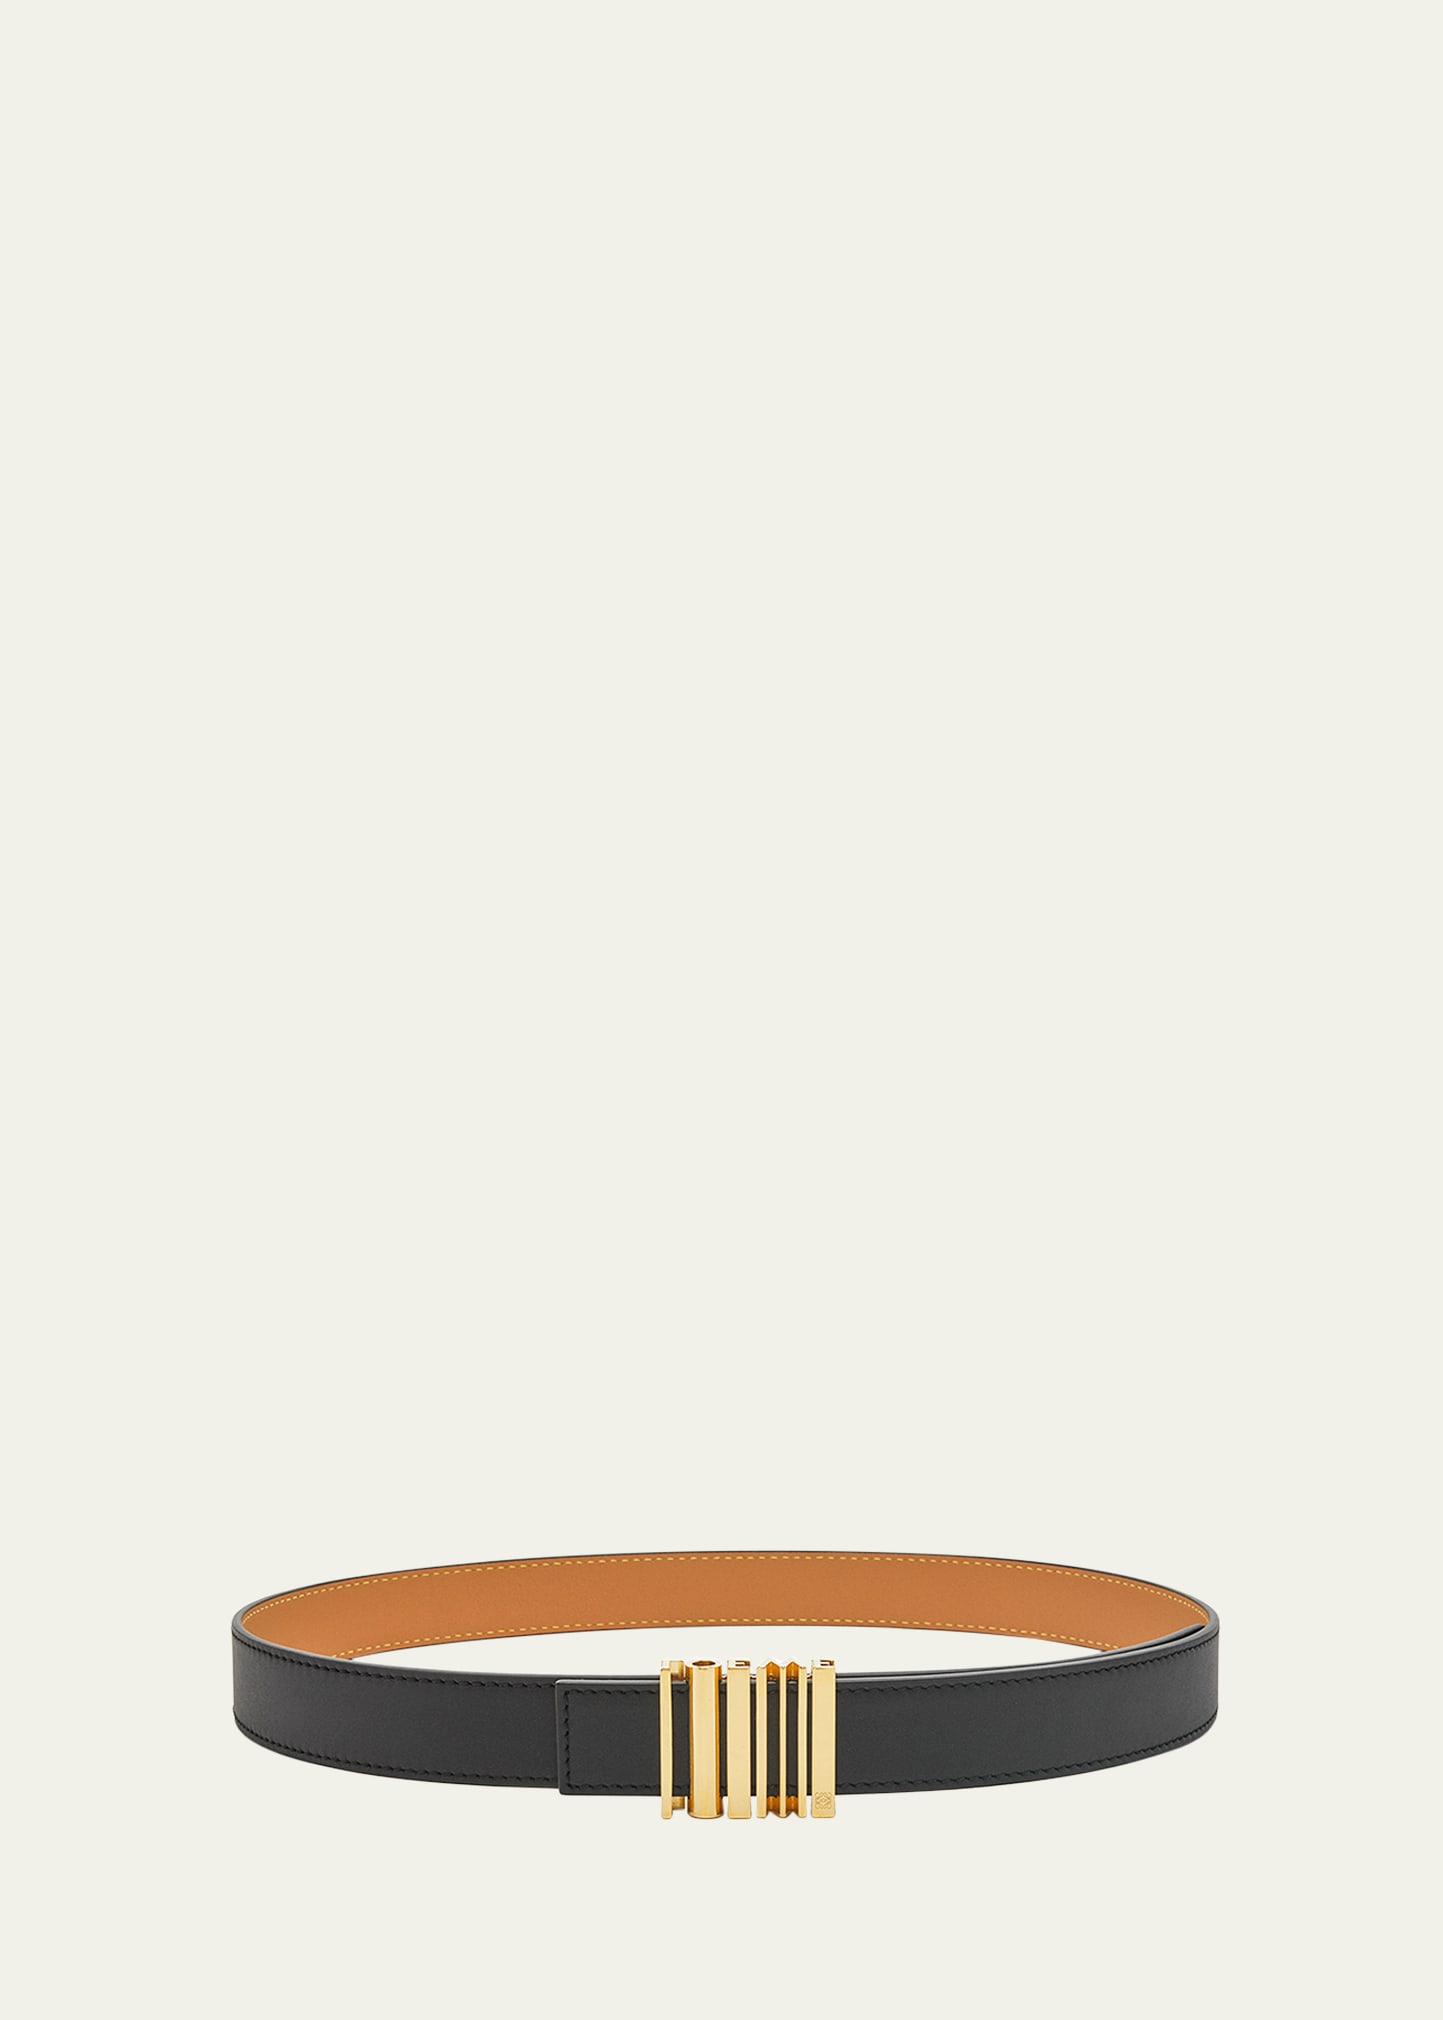 Loewe Graphic Buckle Leather Belt In Black & Gold